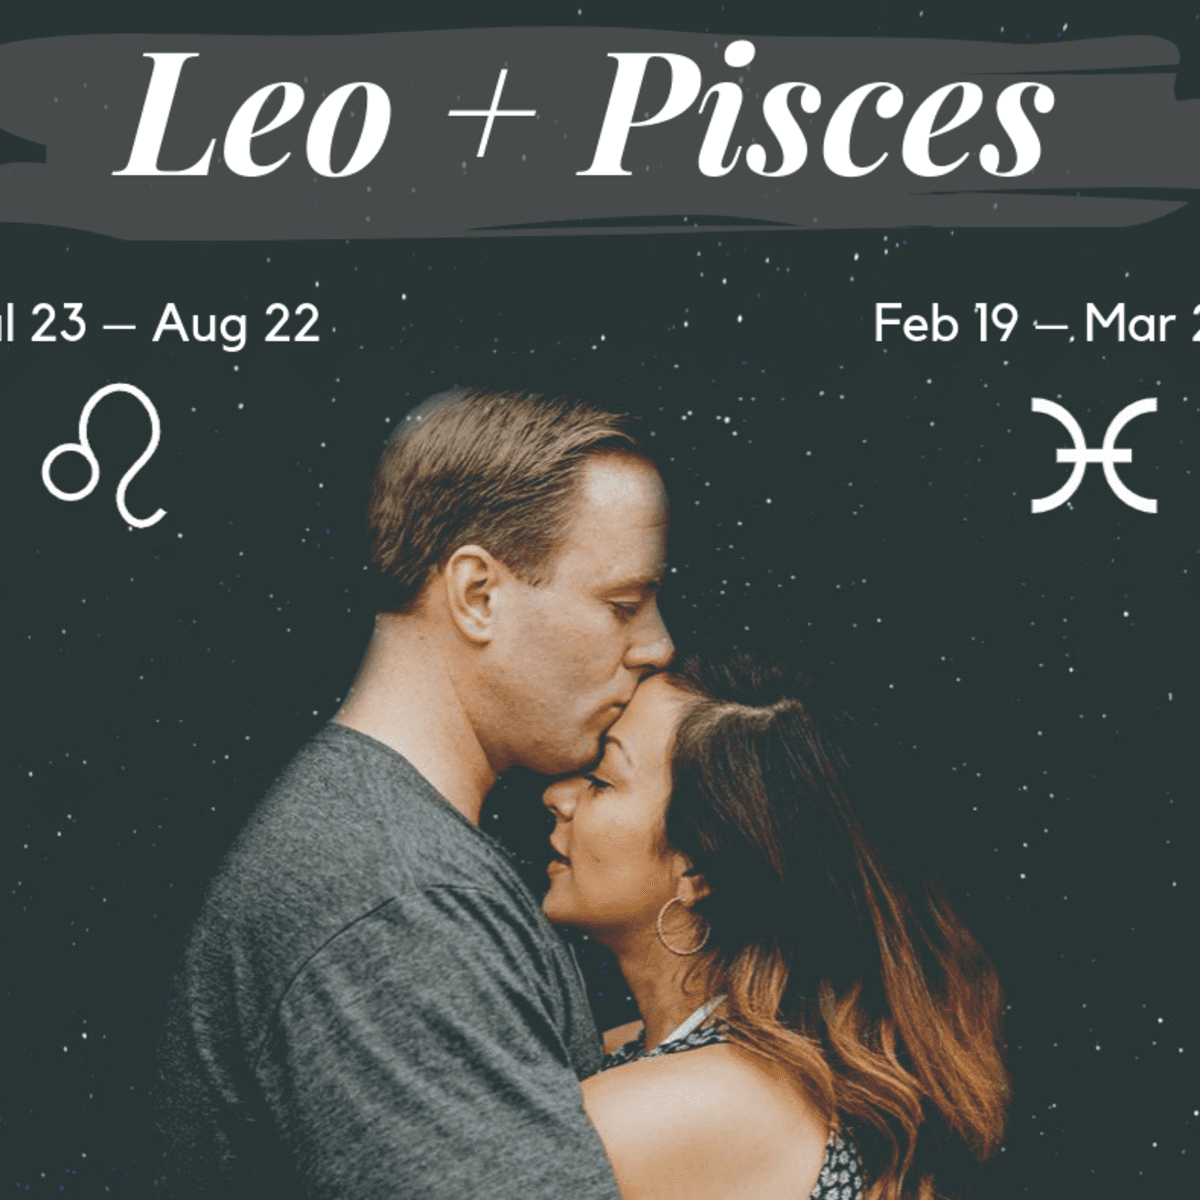 What zodiac sign is compatible with leo woman